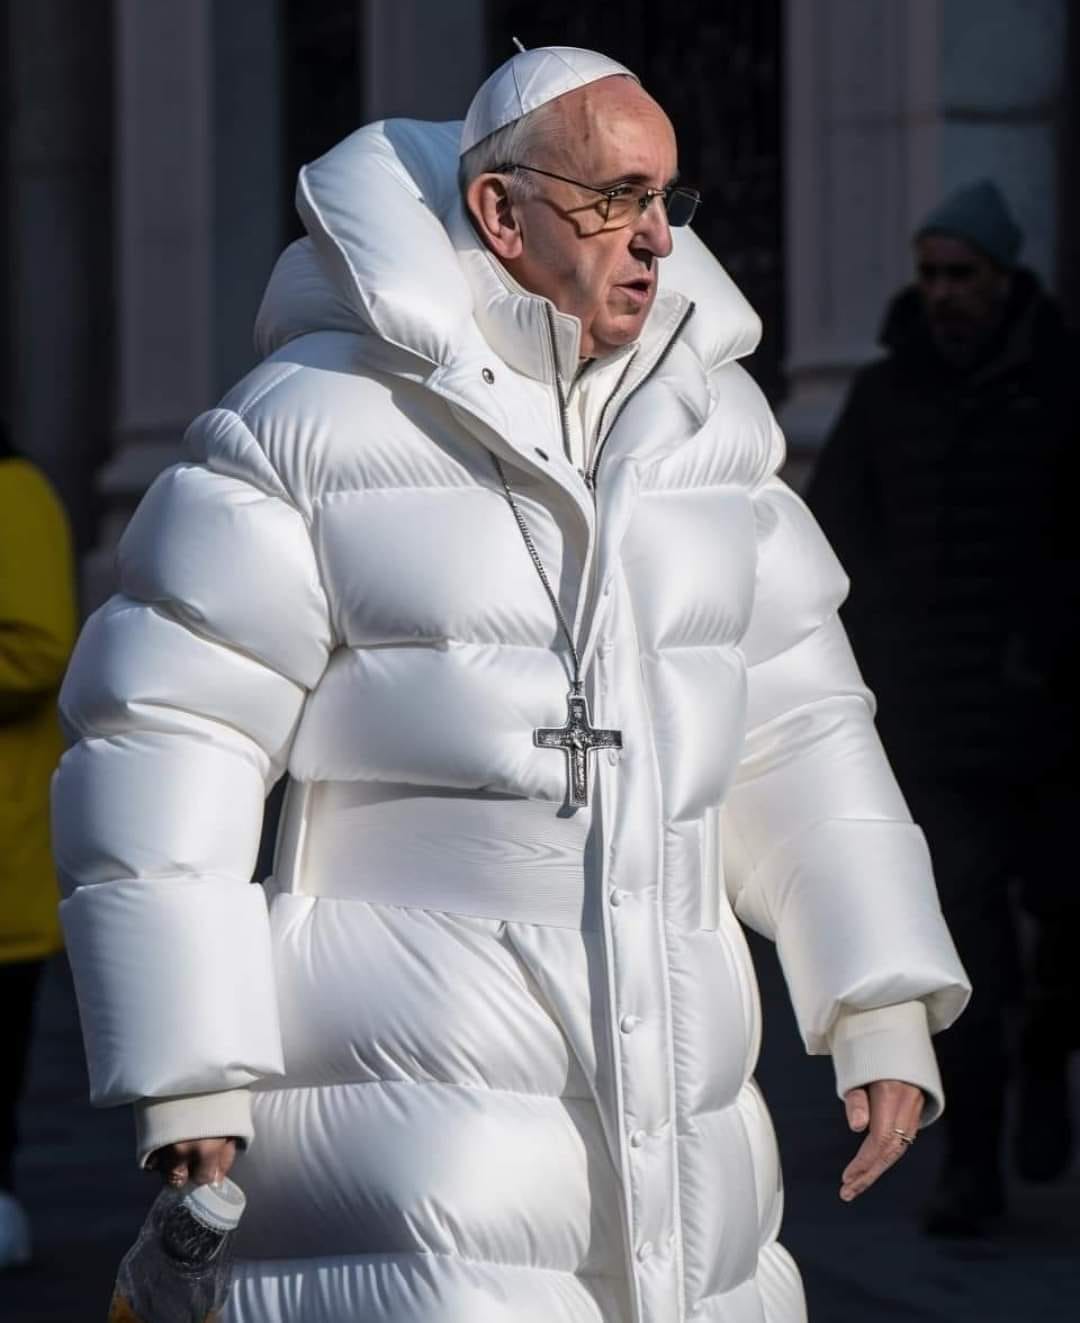 Pope Francis in an all white winter coat. : r/pics